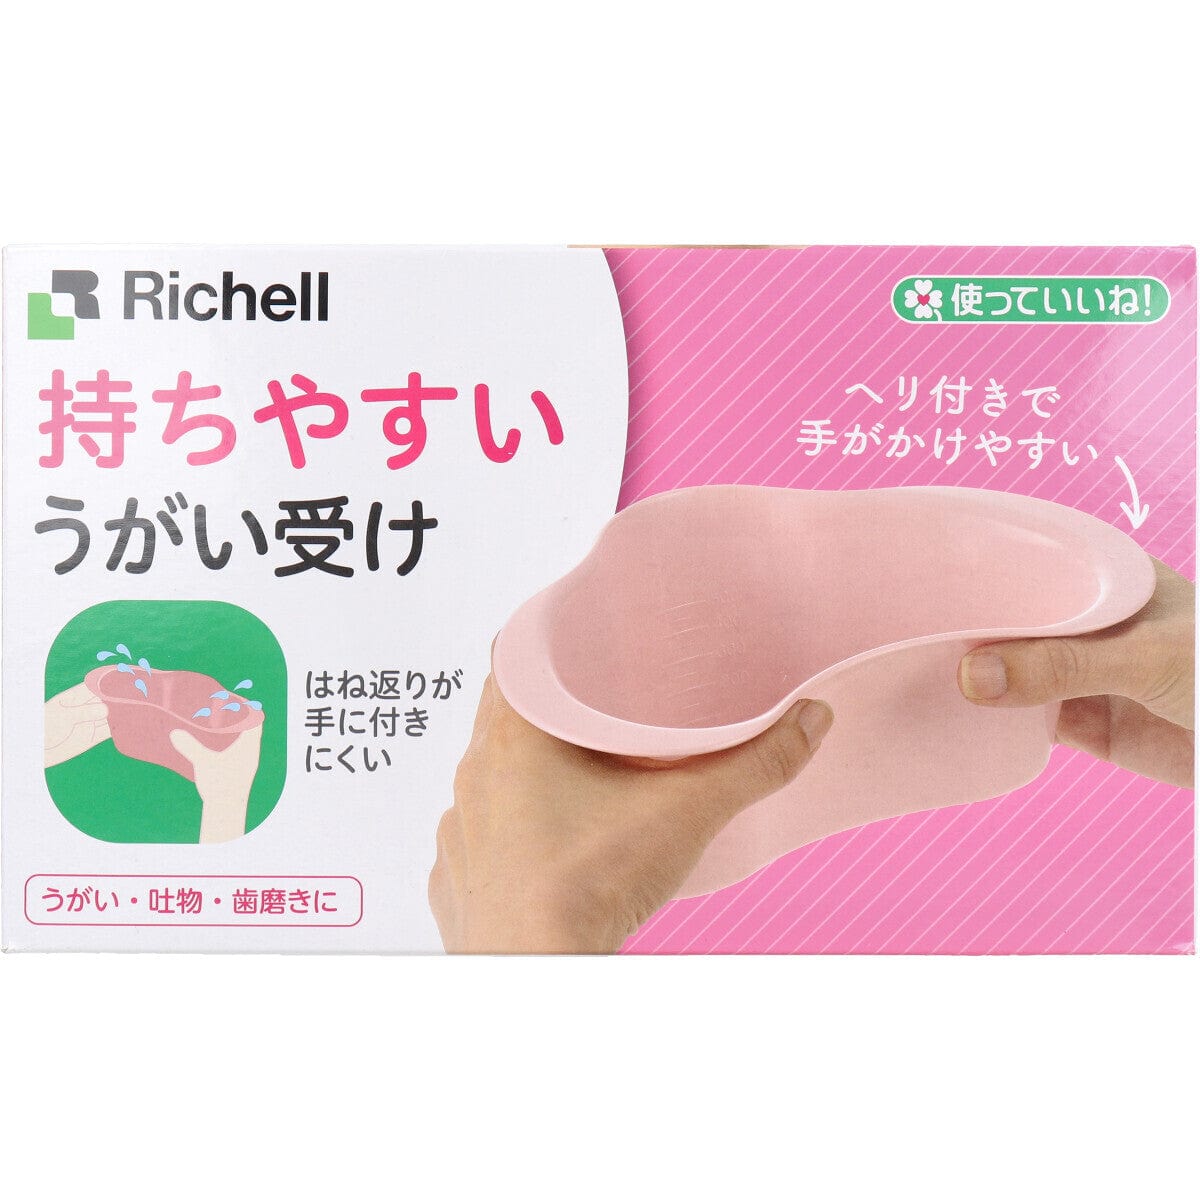 Richell - You Can Use It Easy to Hold Water Gargle Cup -  Baby Gargle Cup  Durio.sg